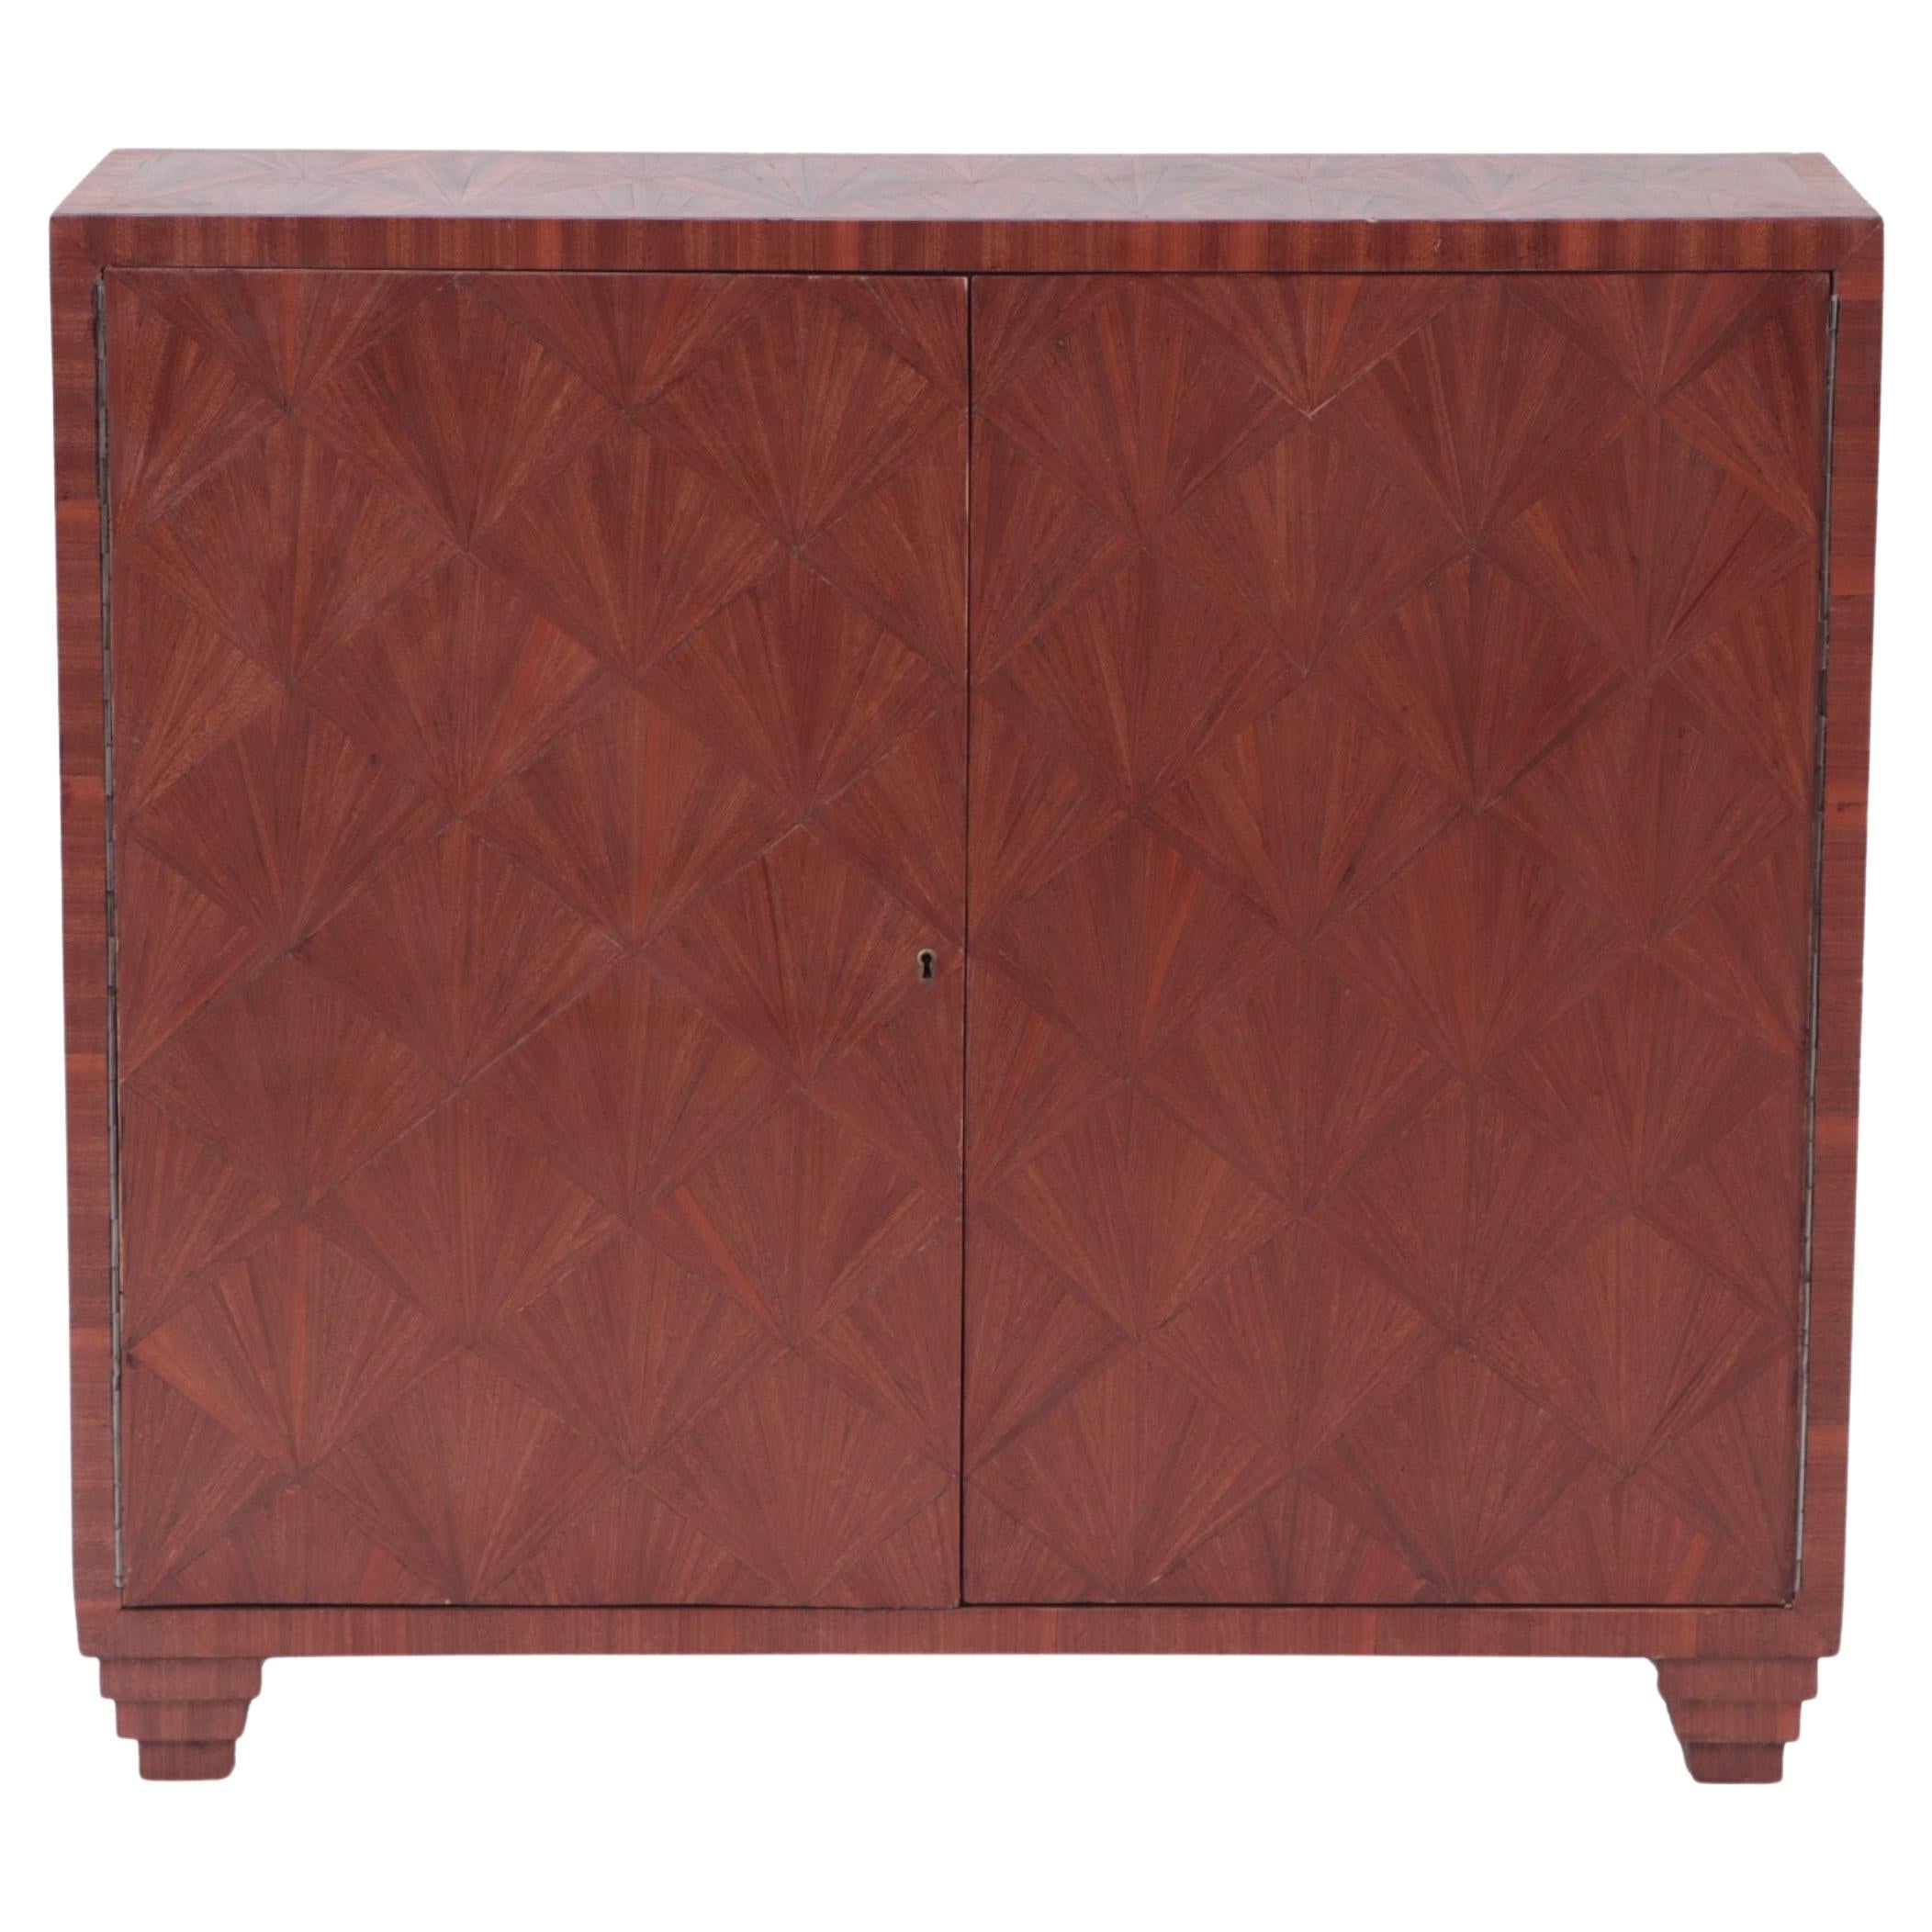 A beautiful inlaid two door cabinet in the manner of Jean-Michel Frank. Contemporary.